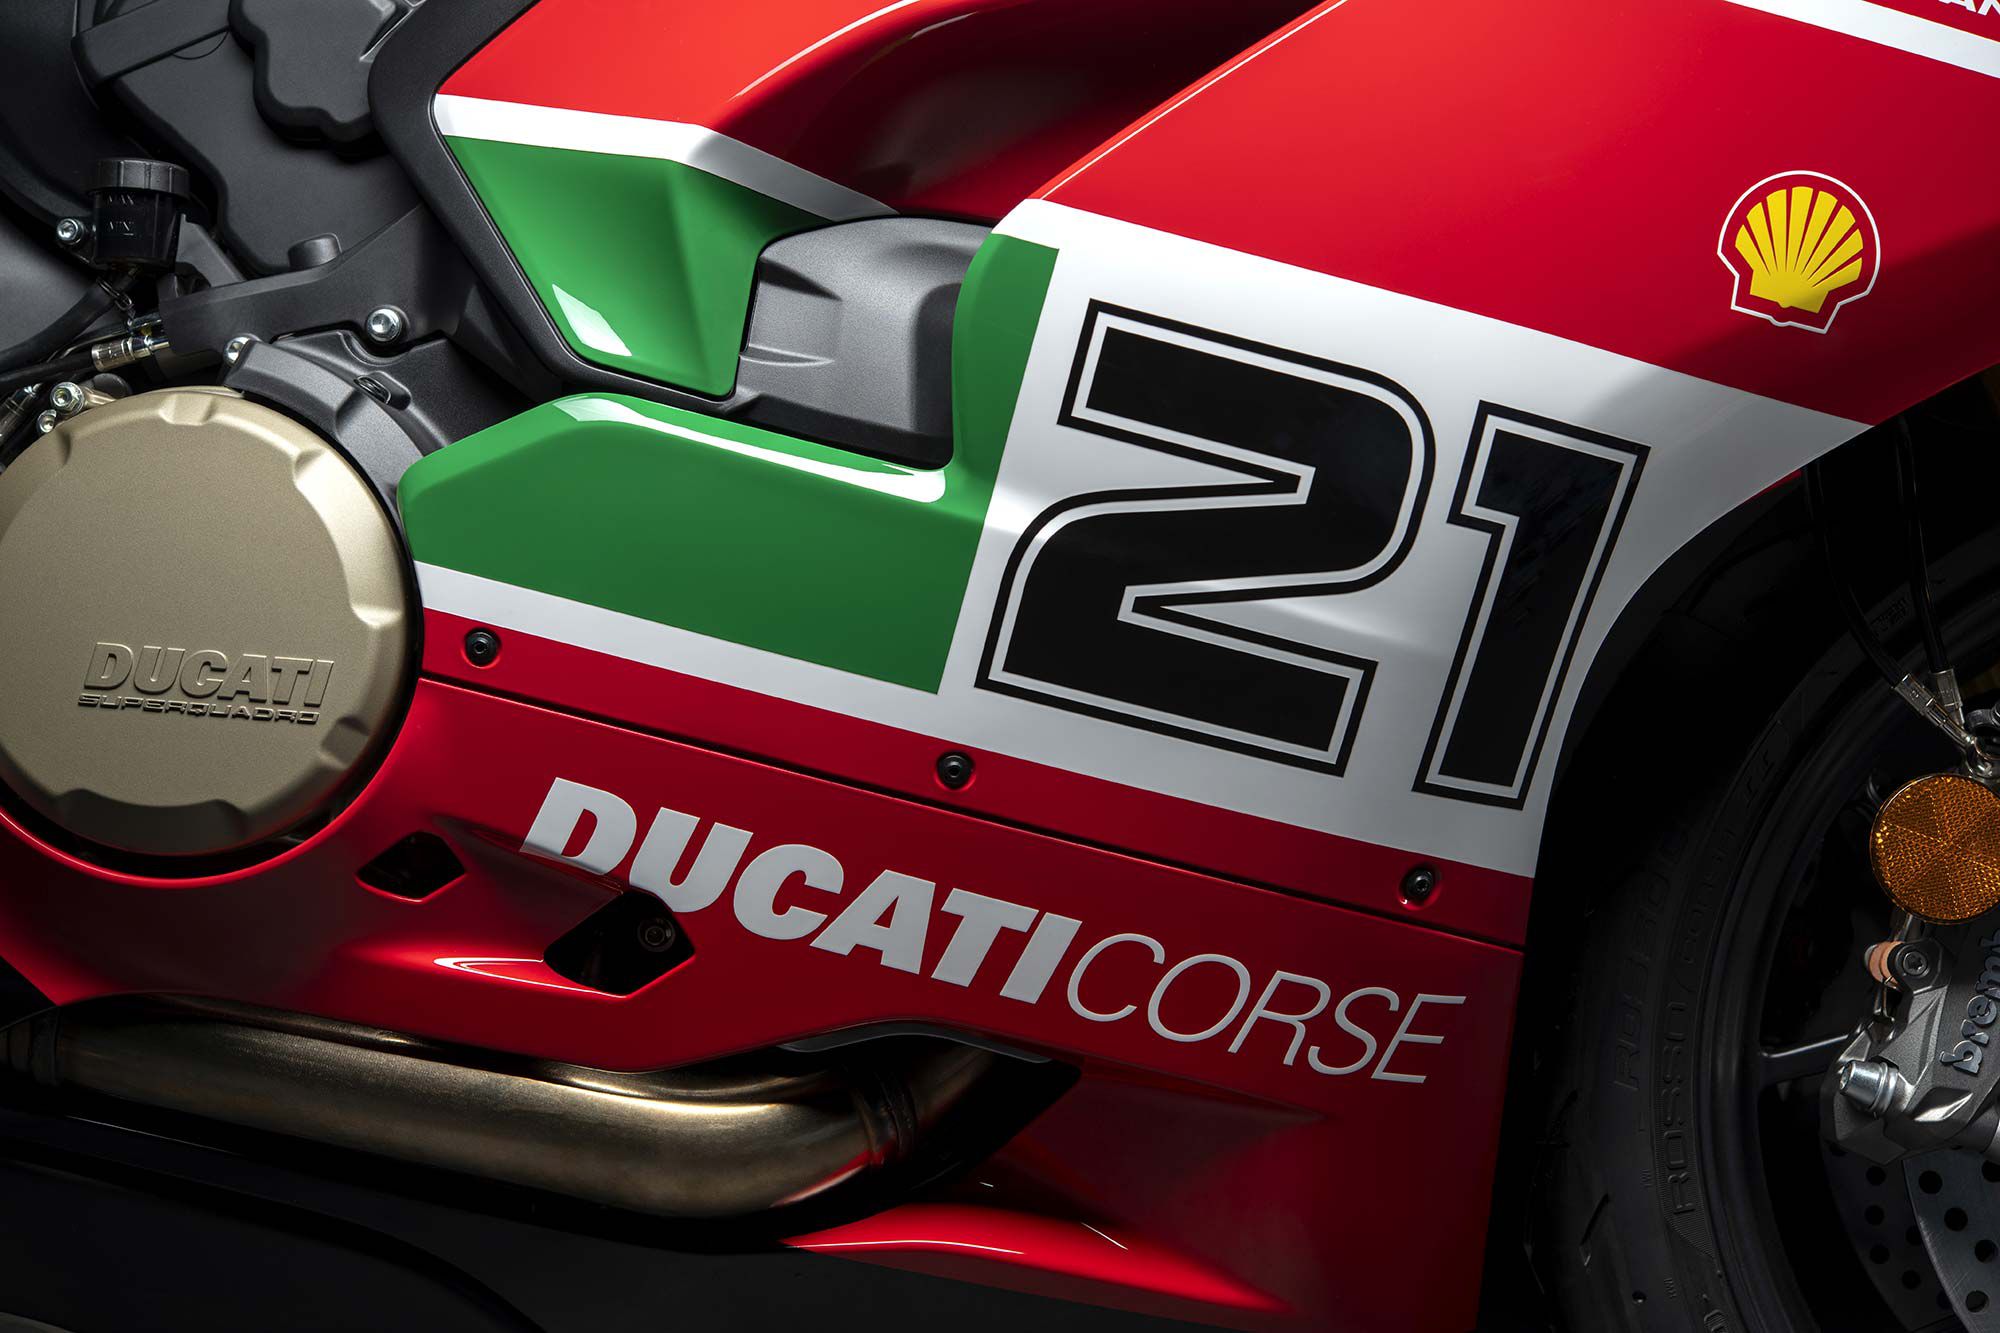 Ducati’s styling department put a lot of love into the design of the Bayliss 1st Championship 20th Anniversary Edition. Troy’s racing number (21) is featured prominently, while wide green band and narrower white bands are an obvious homage to Italy’s tricolor flag.